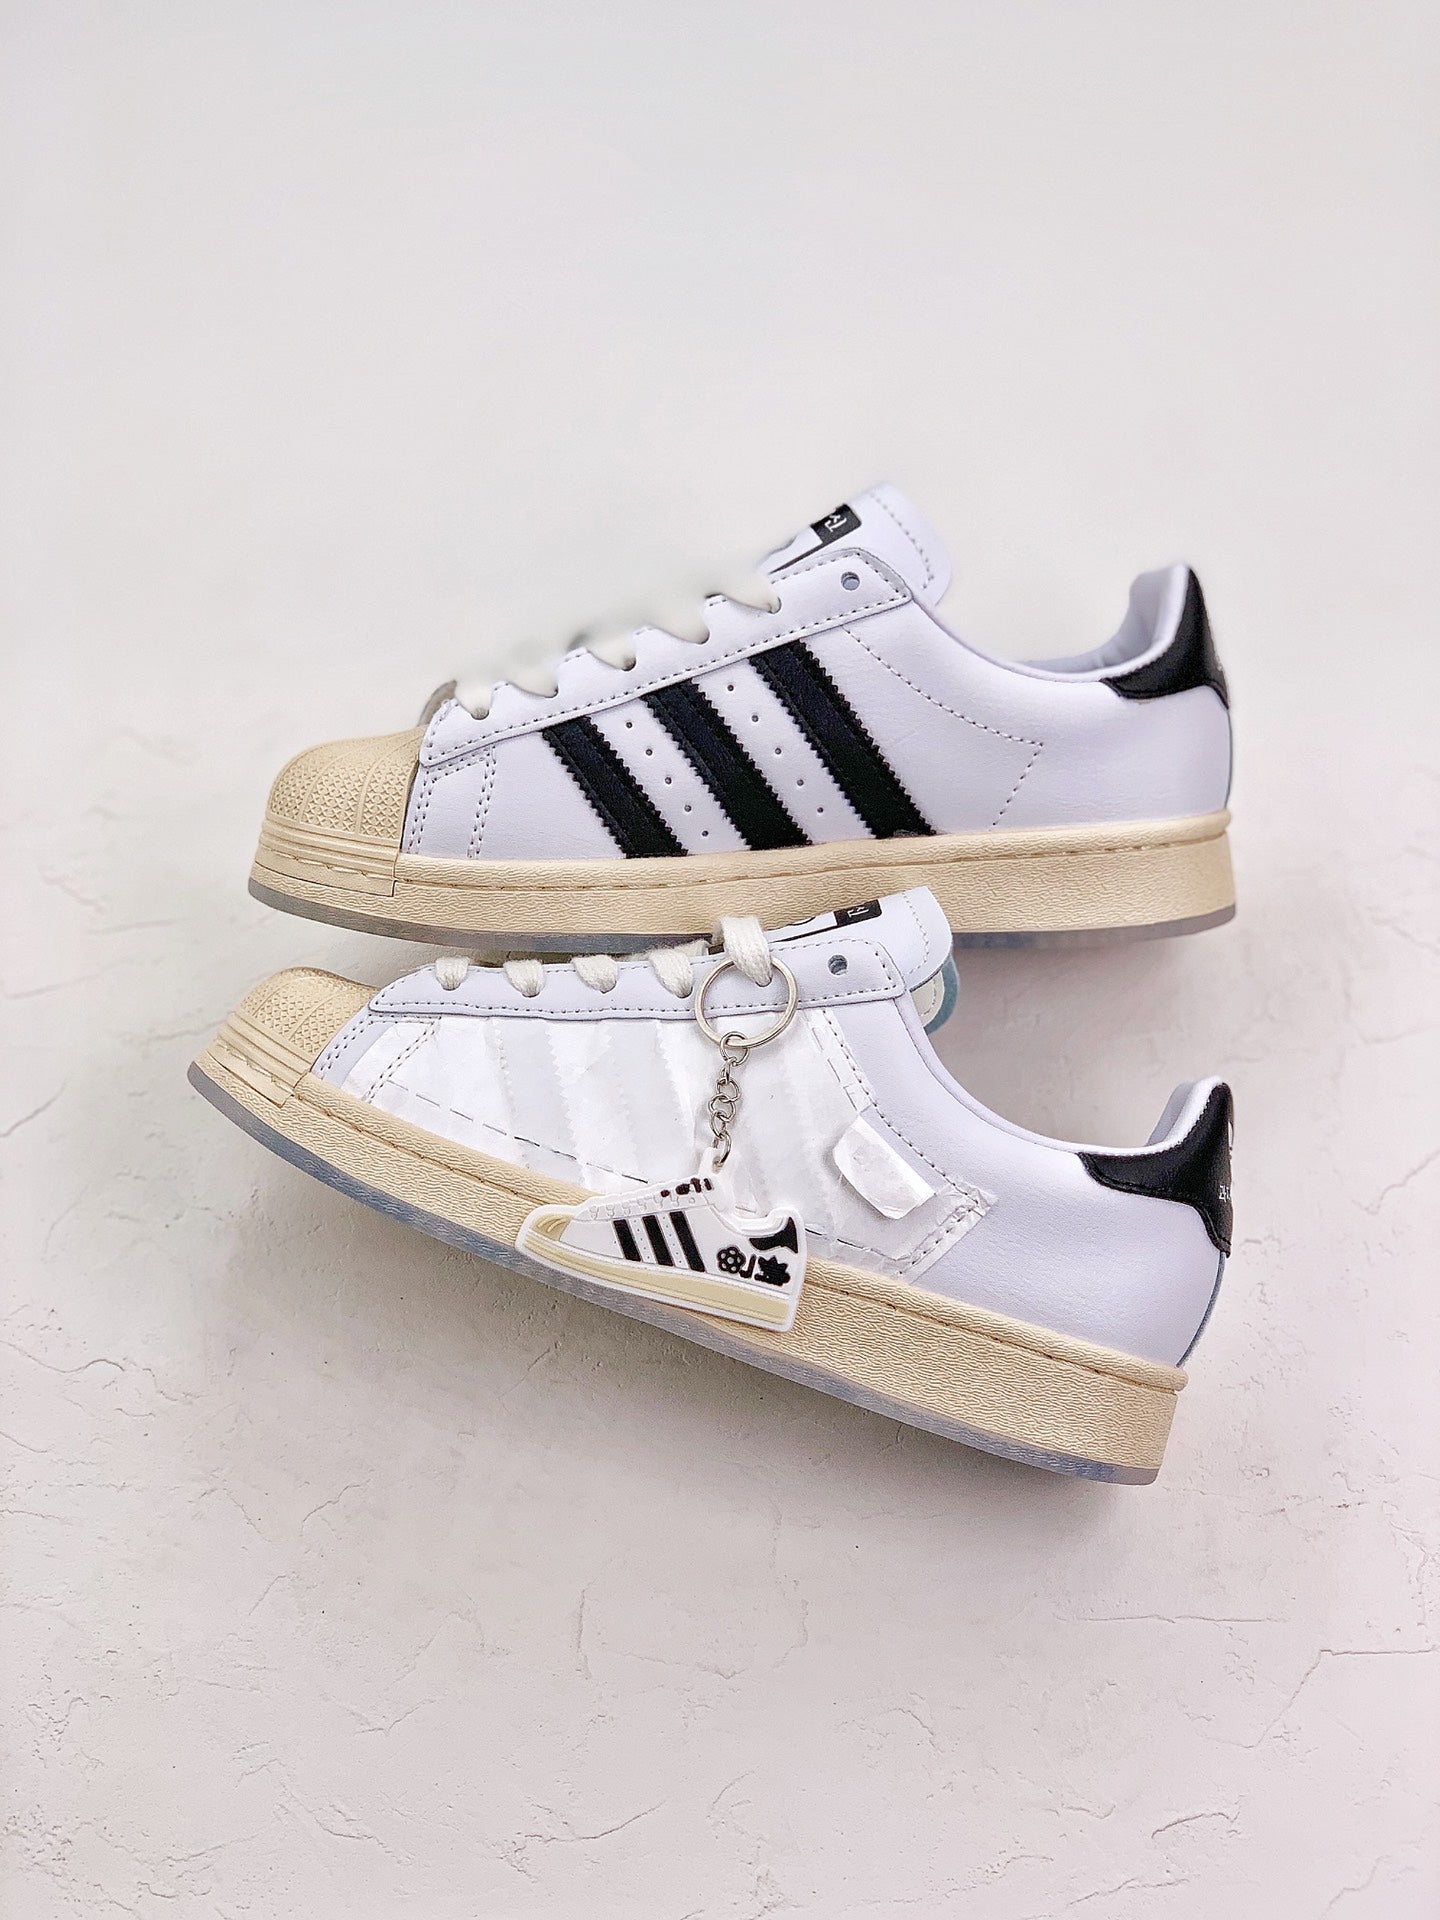 Adidas superstar black and white